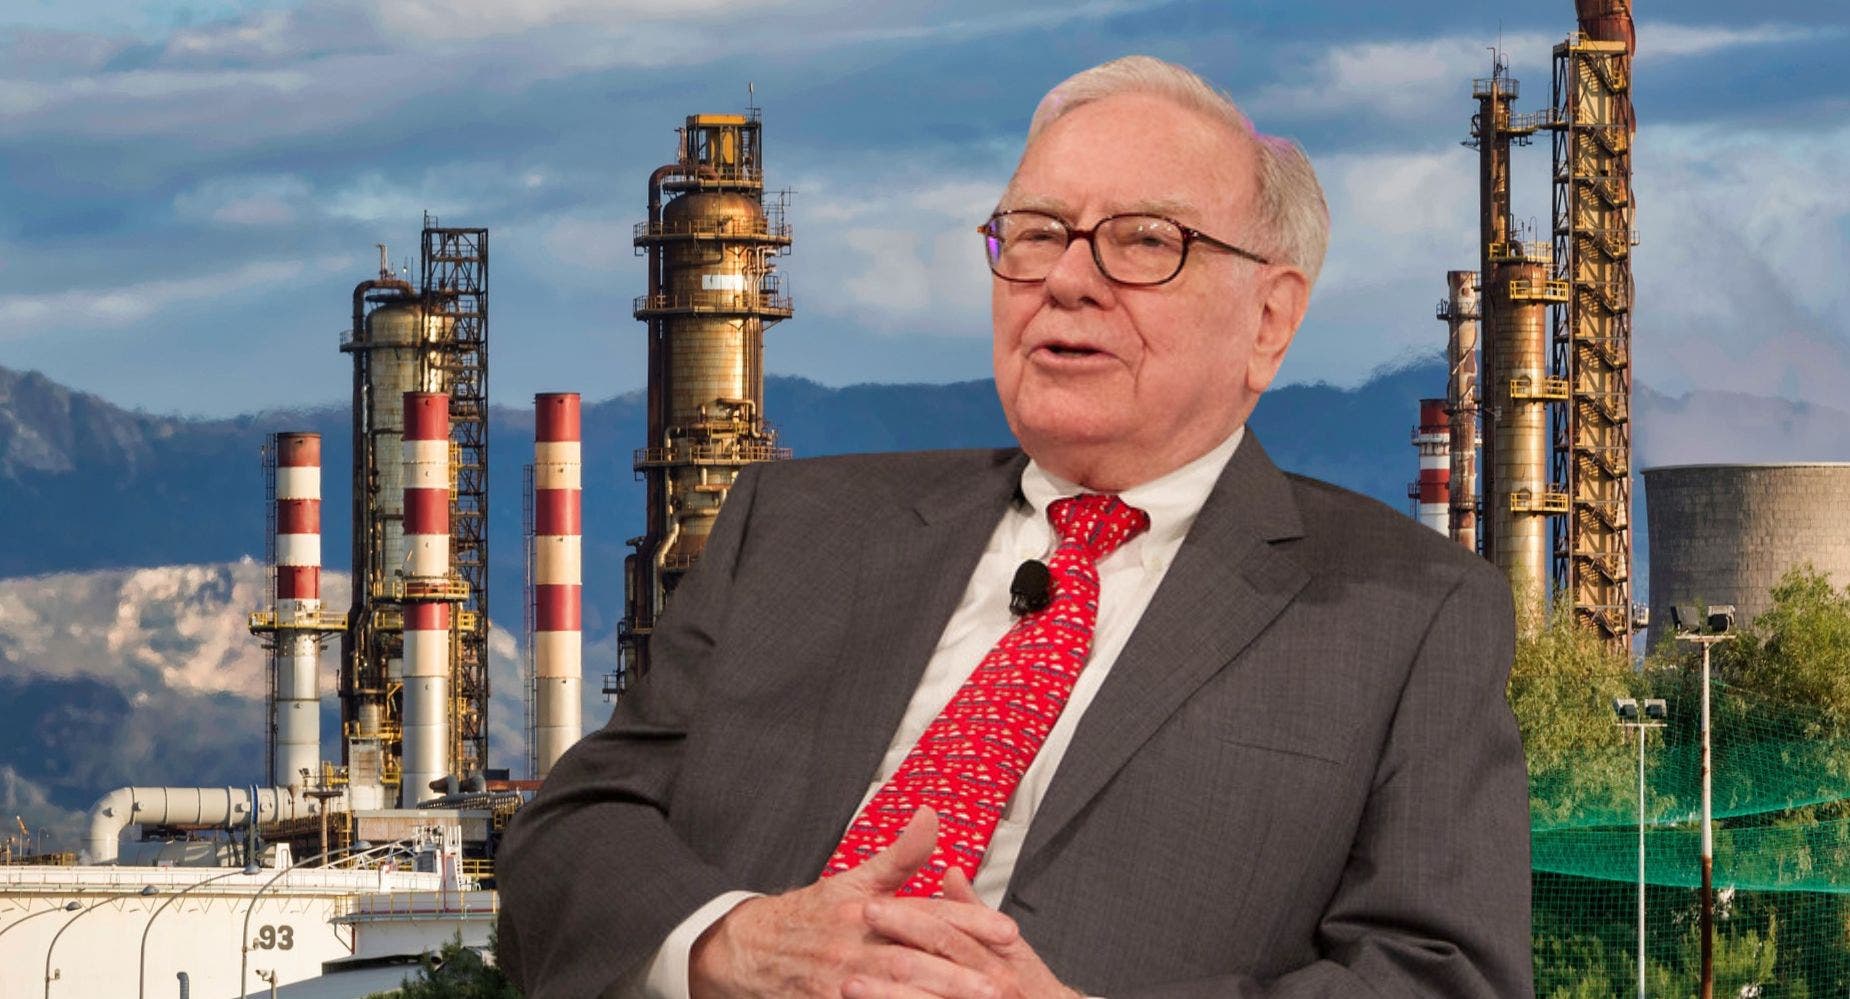 Should Occidental Petroleum Be Renamed Occidental Hathaway? Warren Buffett Gets Approval To Purchase Half The Company's Stock